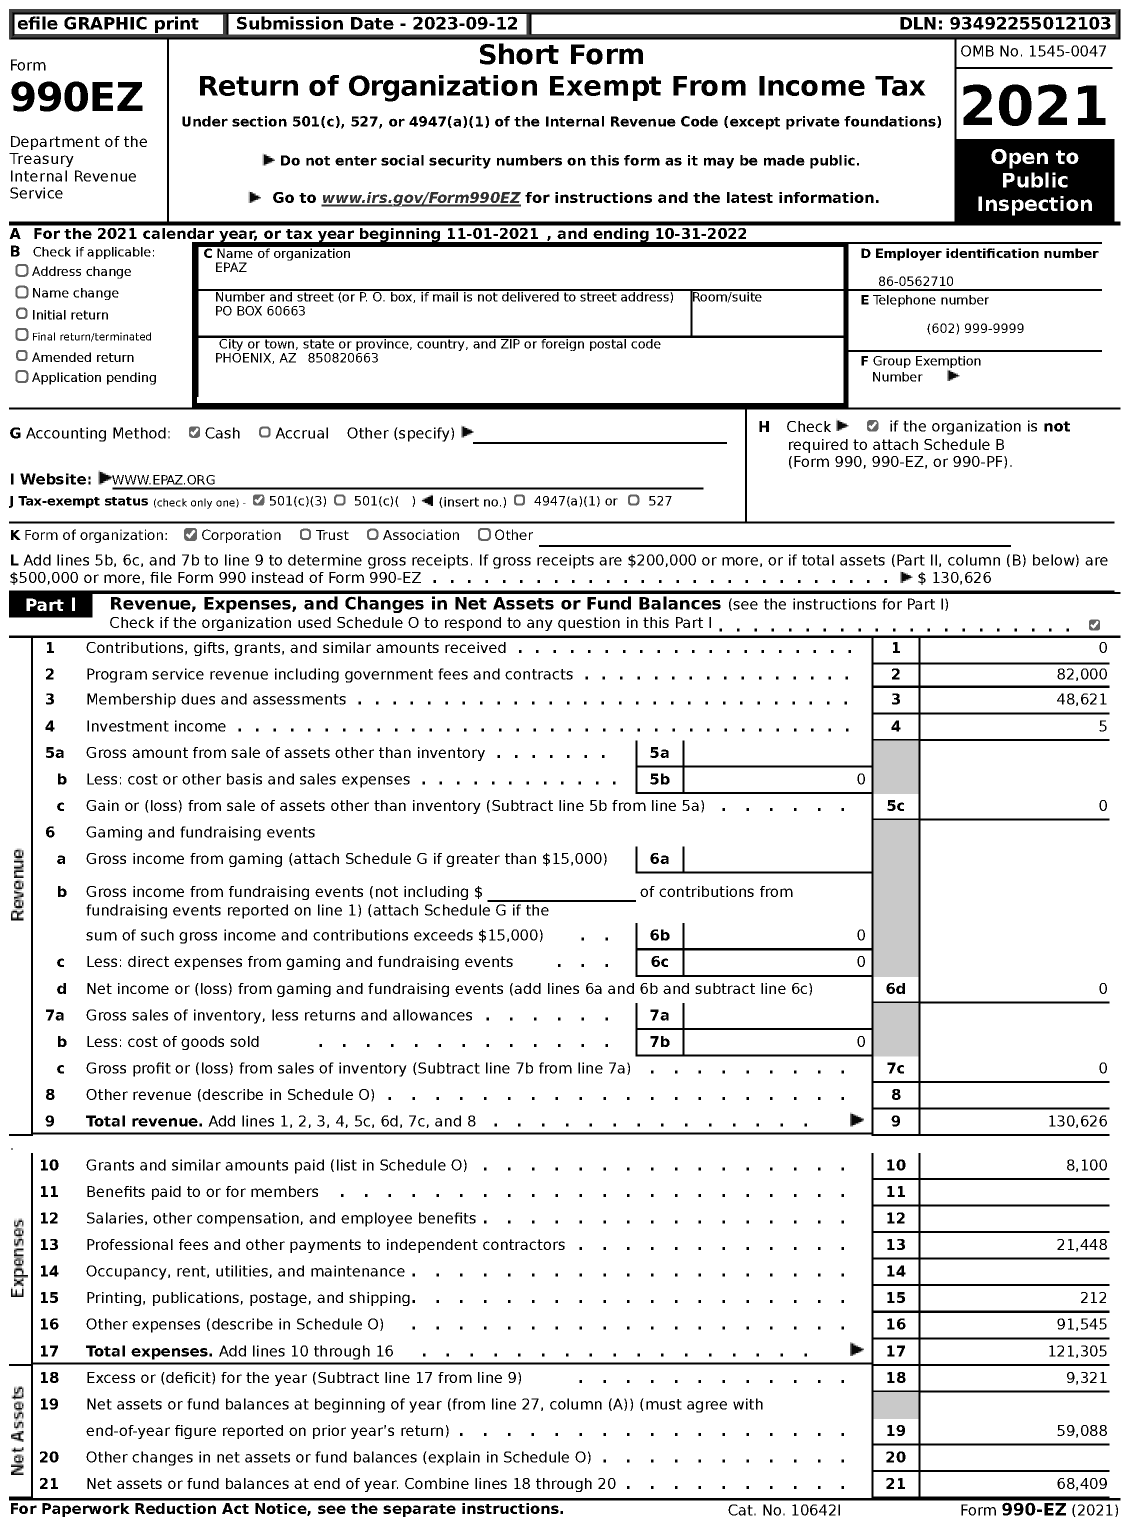 Image of first page of 2021 Form 990EZ for Epaz